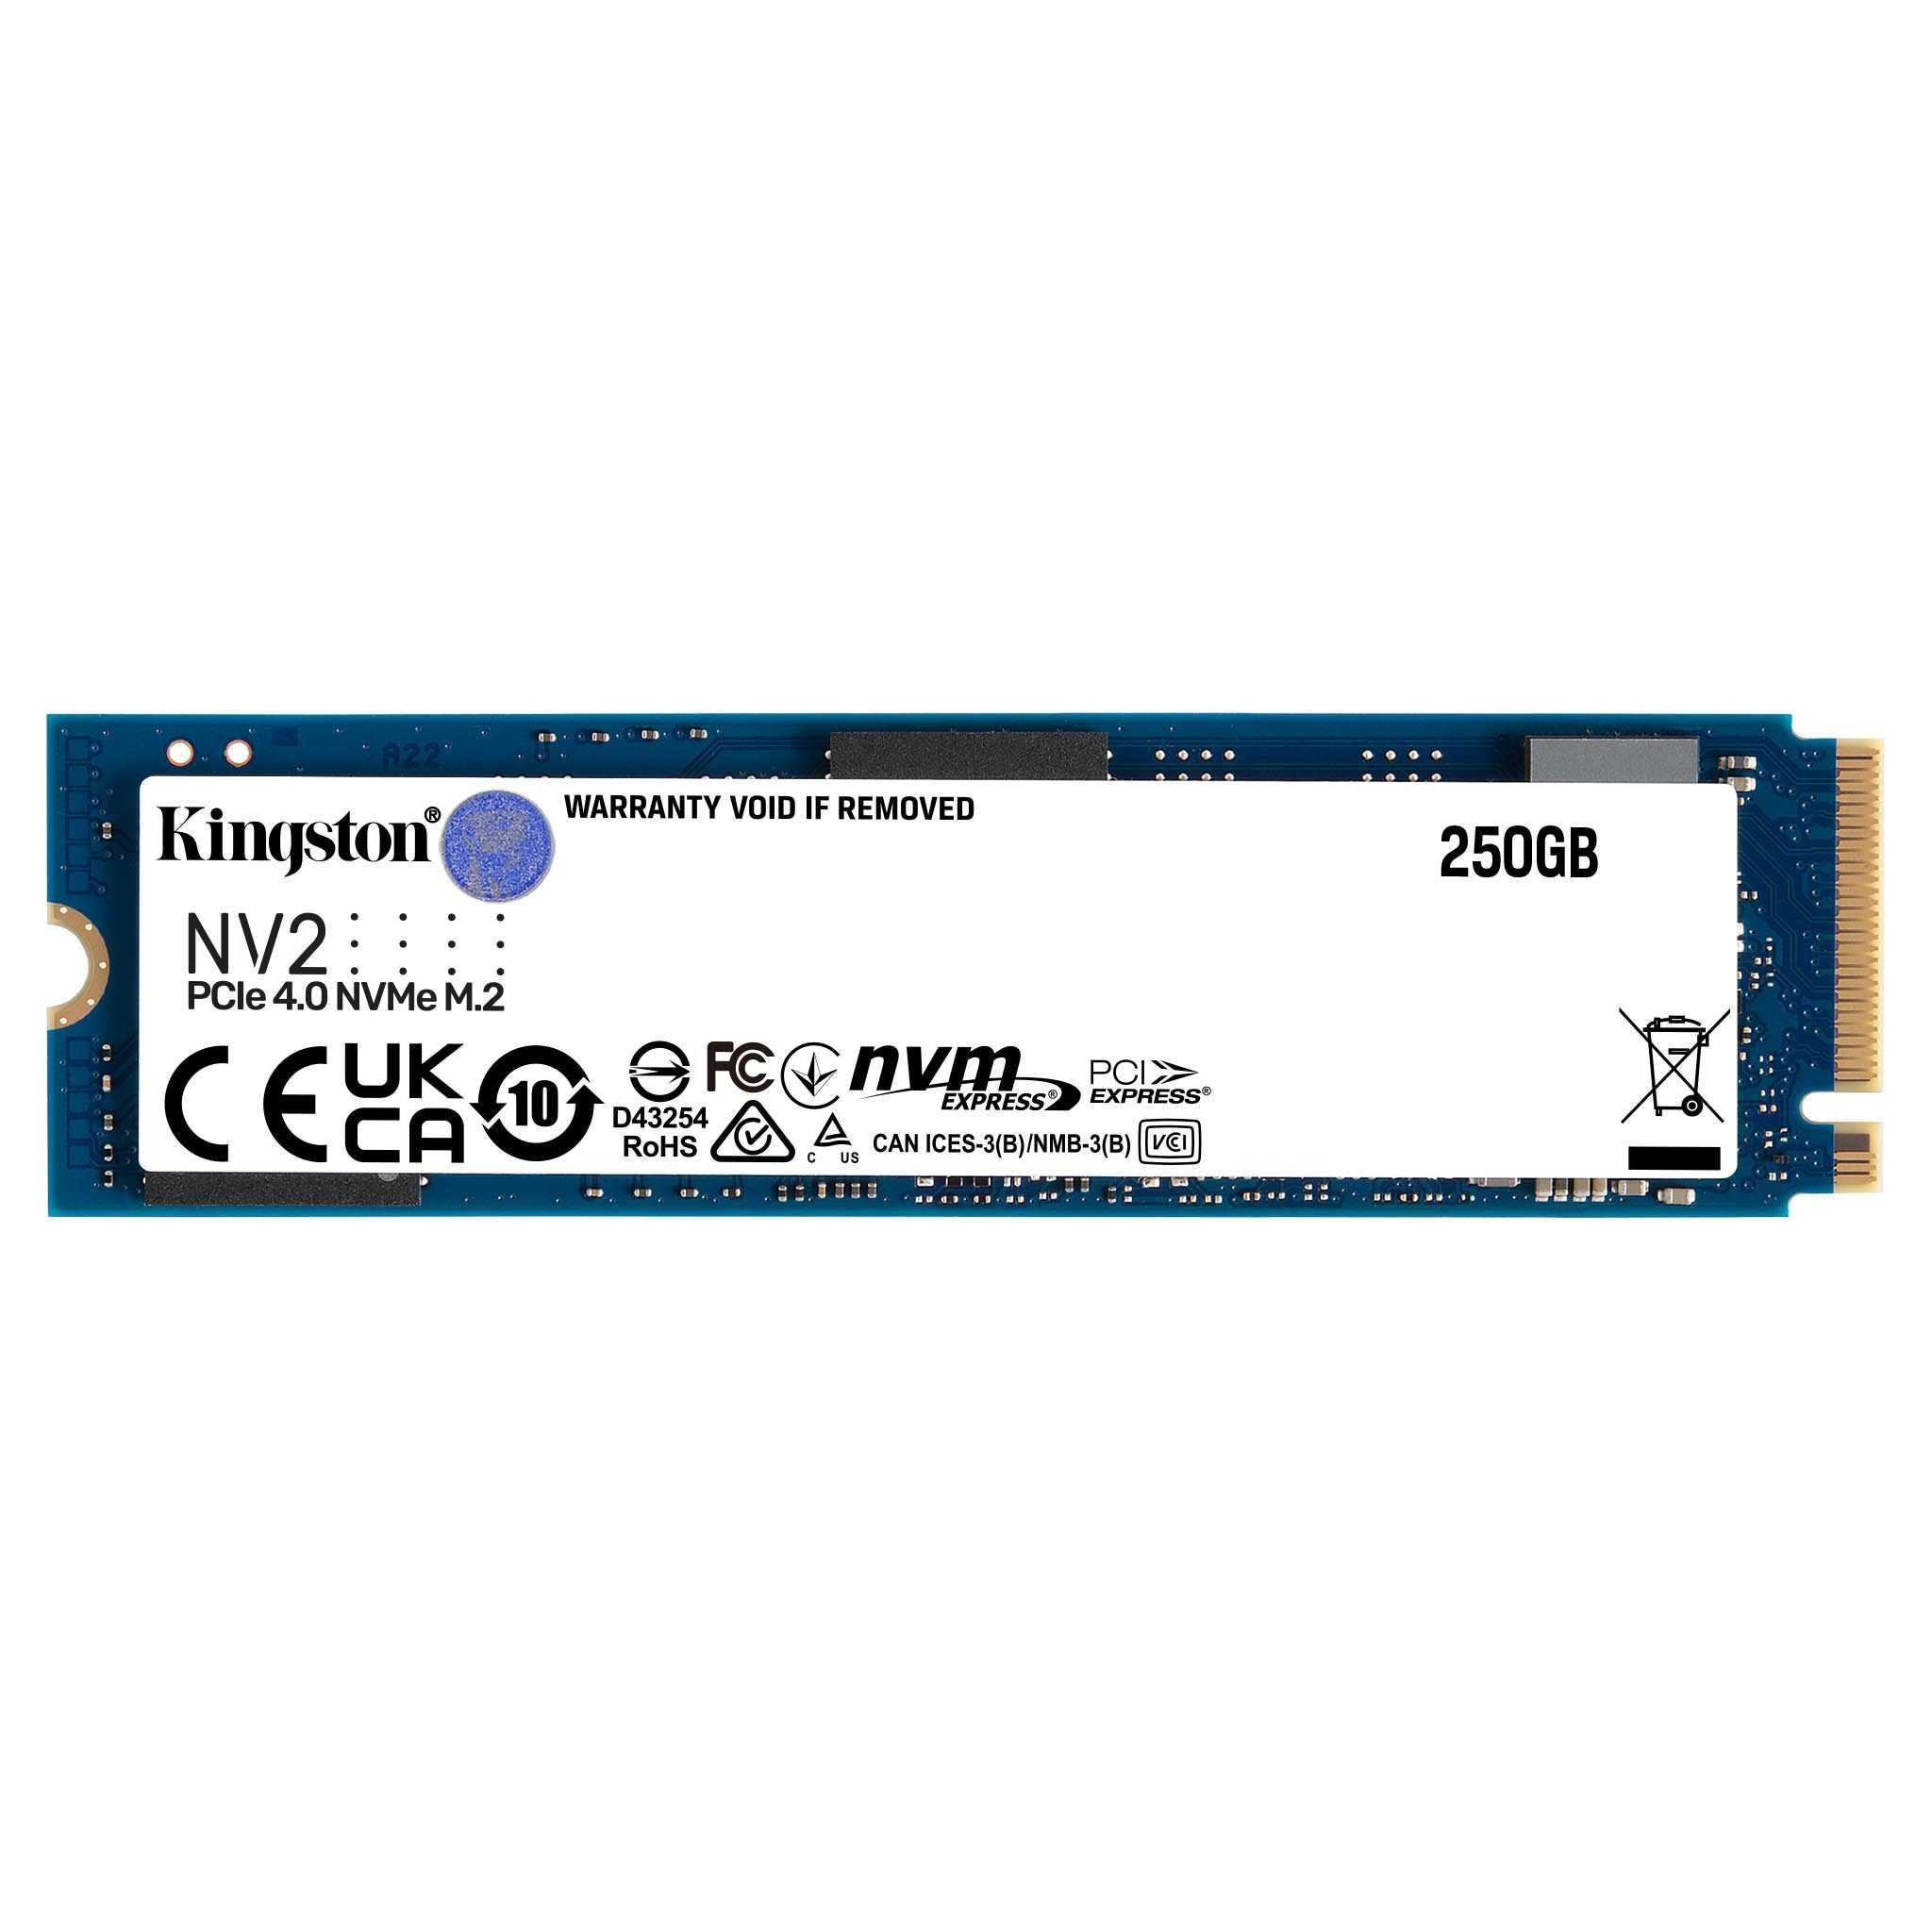 M.2 NVMe SSD 250GB Kingston NV2, Interface: PCIe4.0 x4 / NVMe1.3, M2 Type 2280 form factor, Sequential Reads 3000 MB/s, Sequential Writes 1300 MB/s, Phison E19T controller, TBW: 80TB, 3D QLC NAND flash